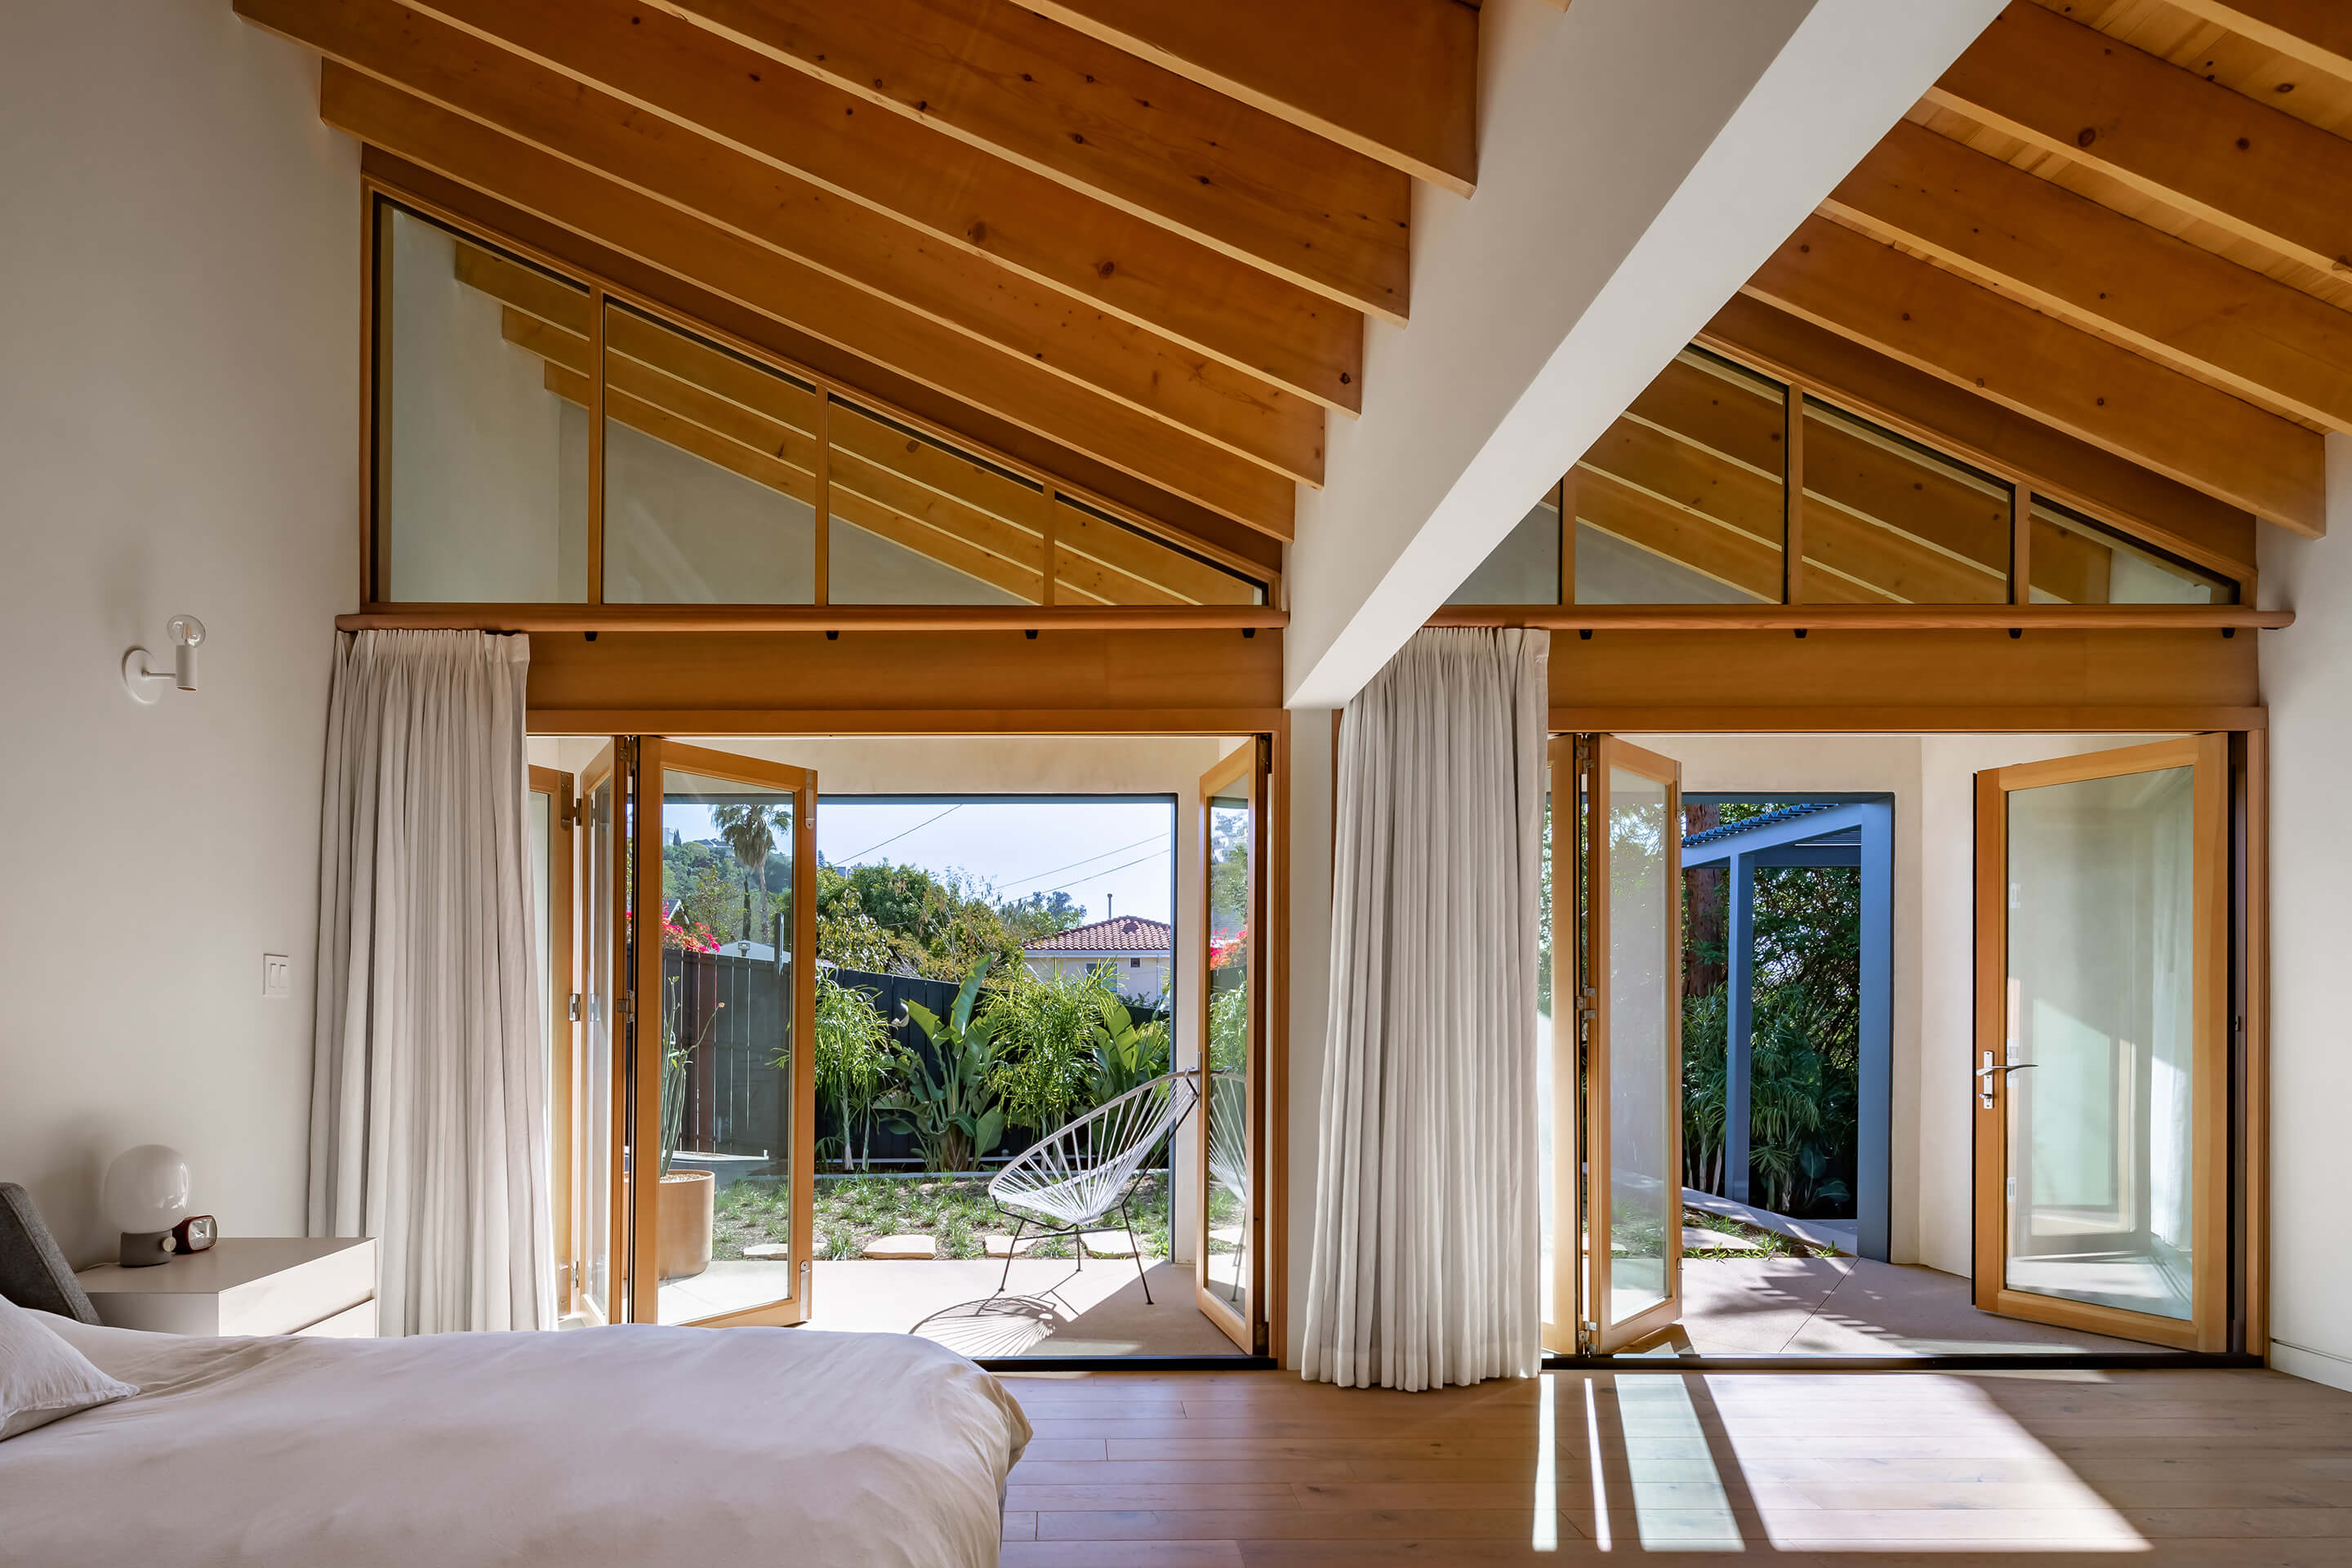 A home designed by PRODUCTORA with wooden beams